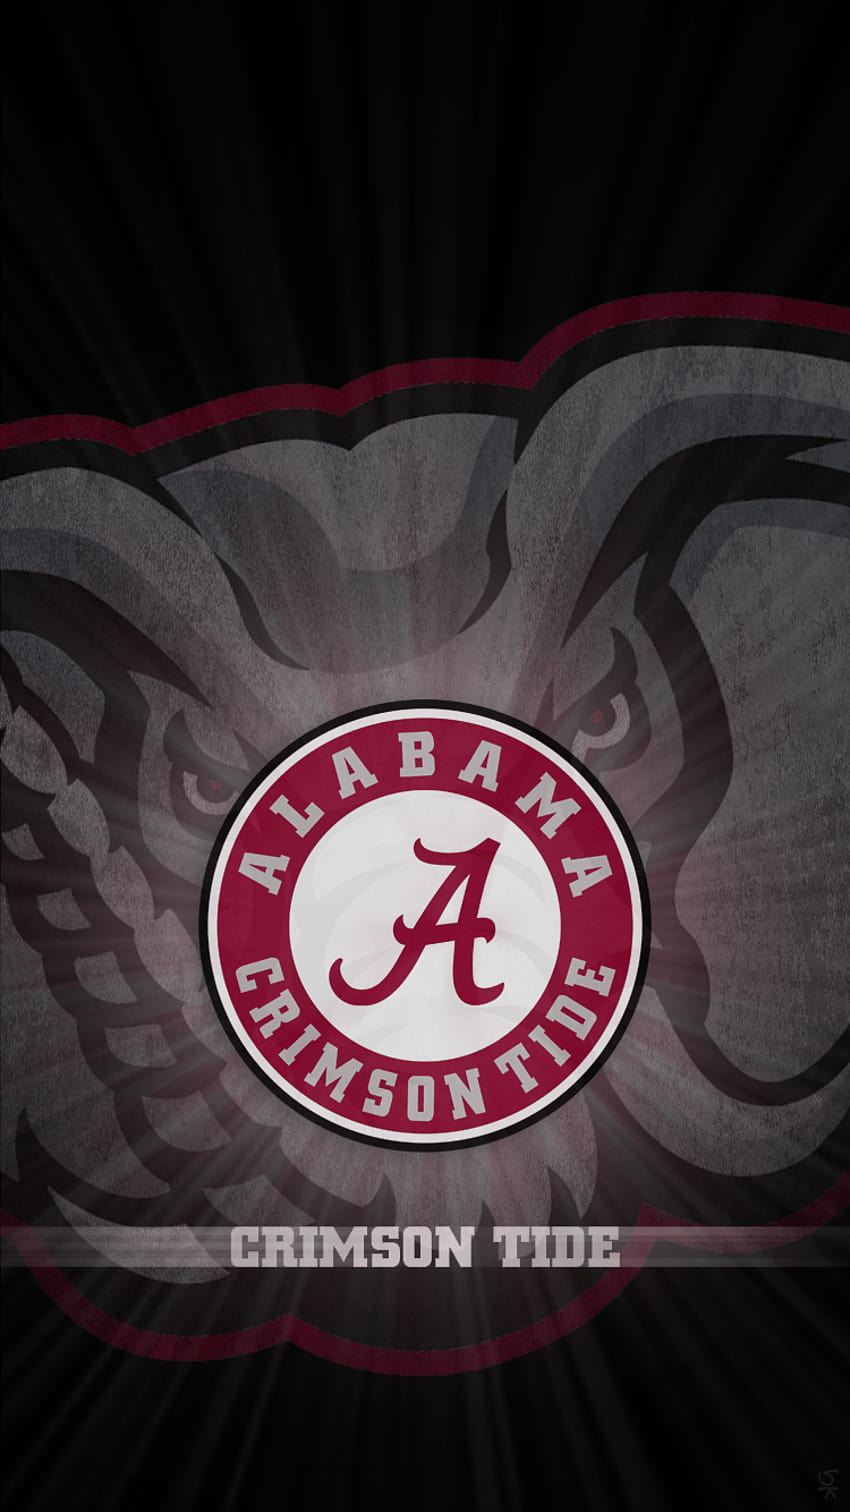 Alabama Chrome Themes and for Crimson Tide Fans Brand, roll tide roll HD phone wallpaper